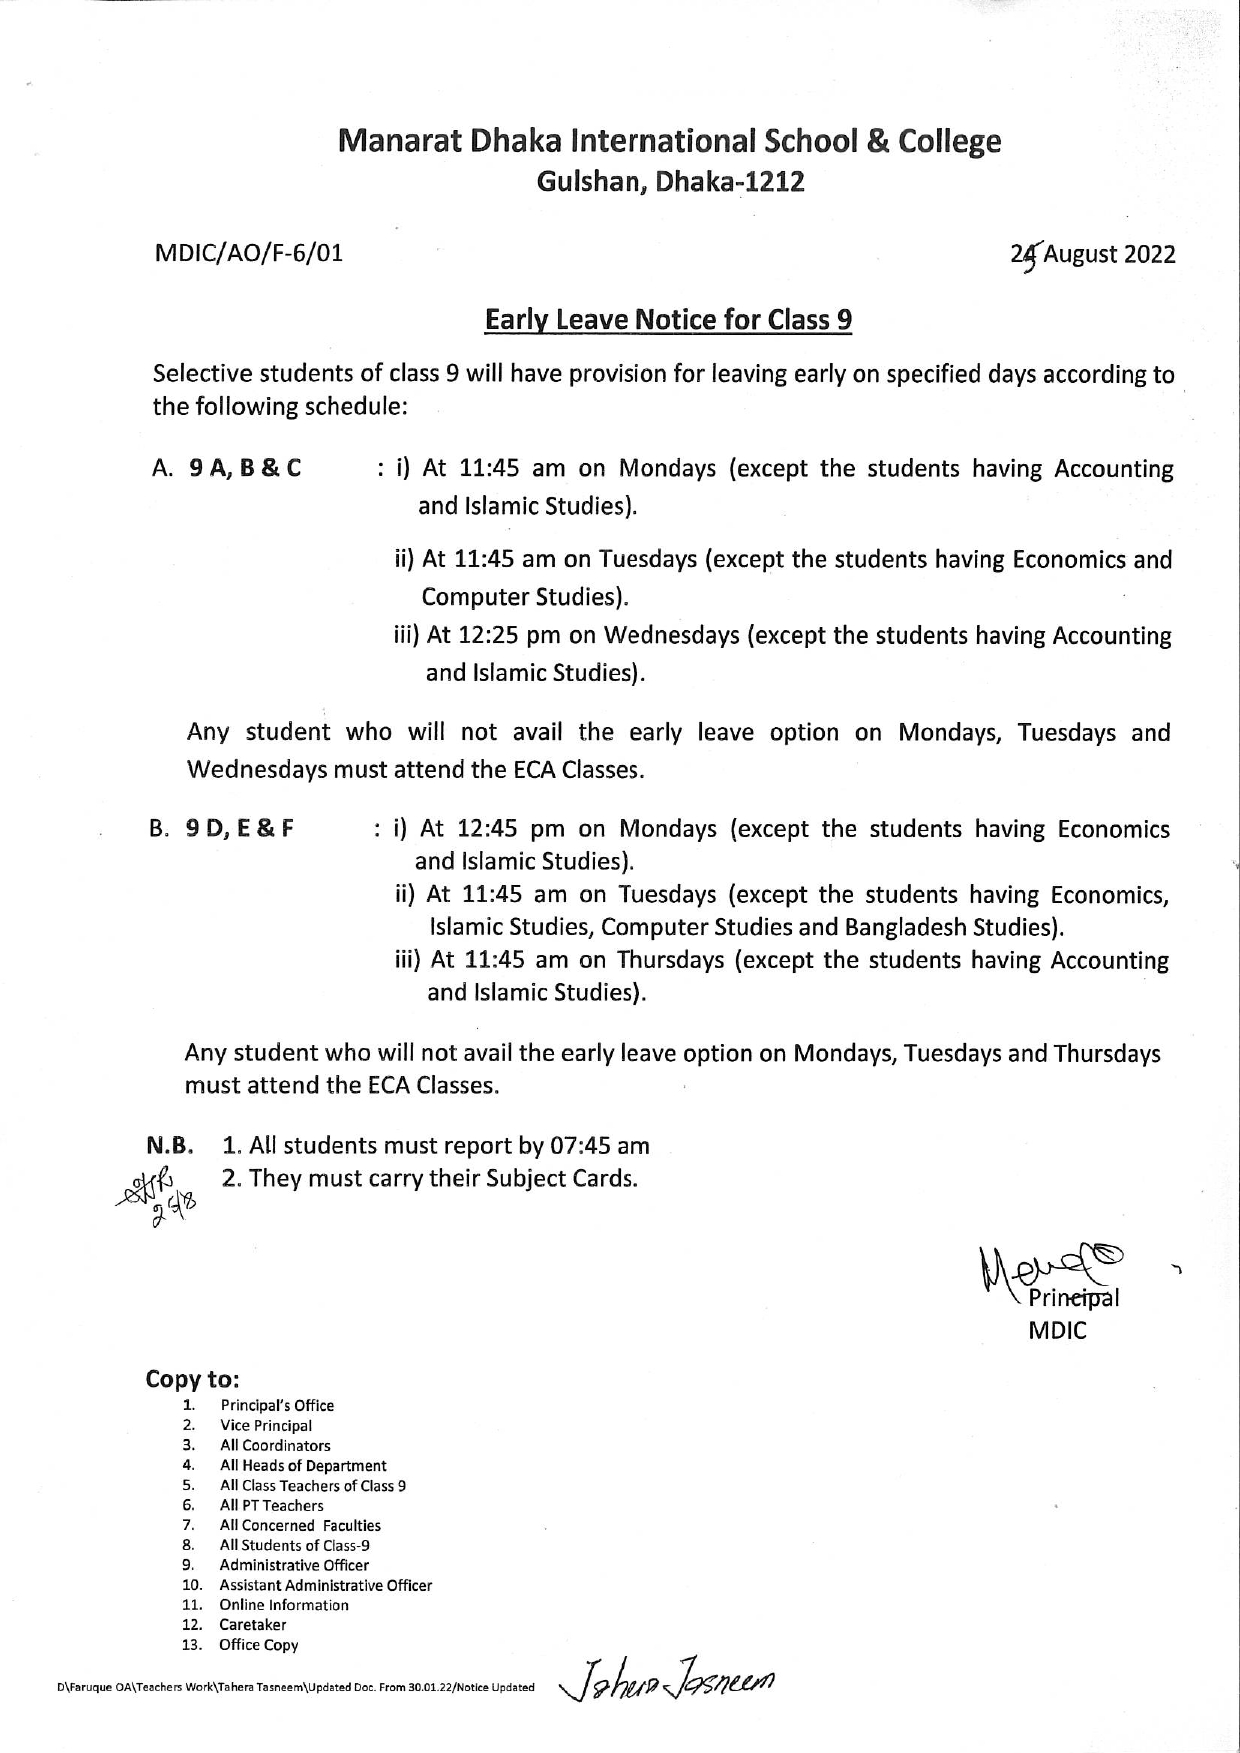 Early Leave Notice for Class 9